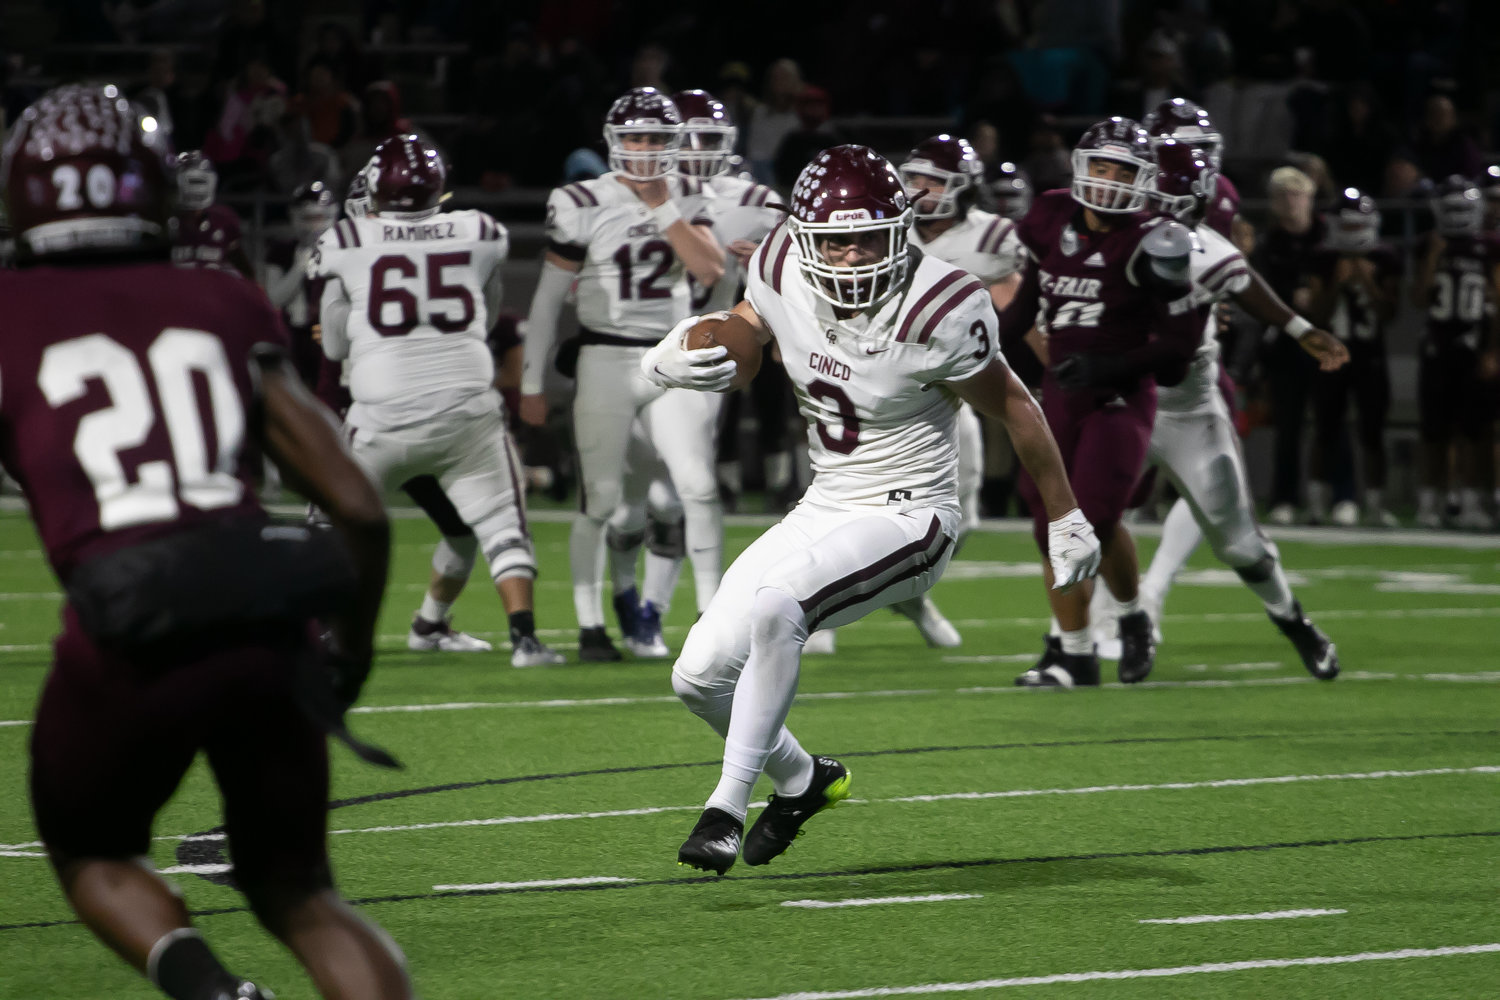 Seth Salverino cuts upfield during Friday's Class 6A-Division I area round game between Cinco Ranch and Cy-Fair at Pridgeon Stadium.